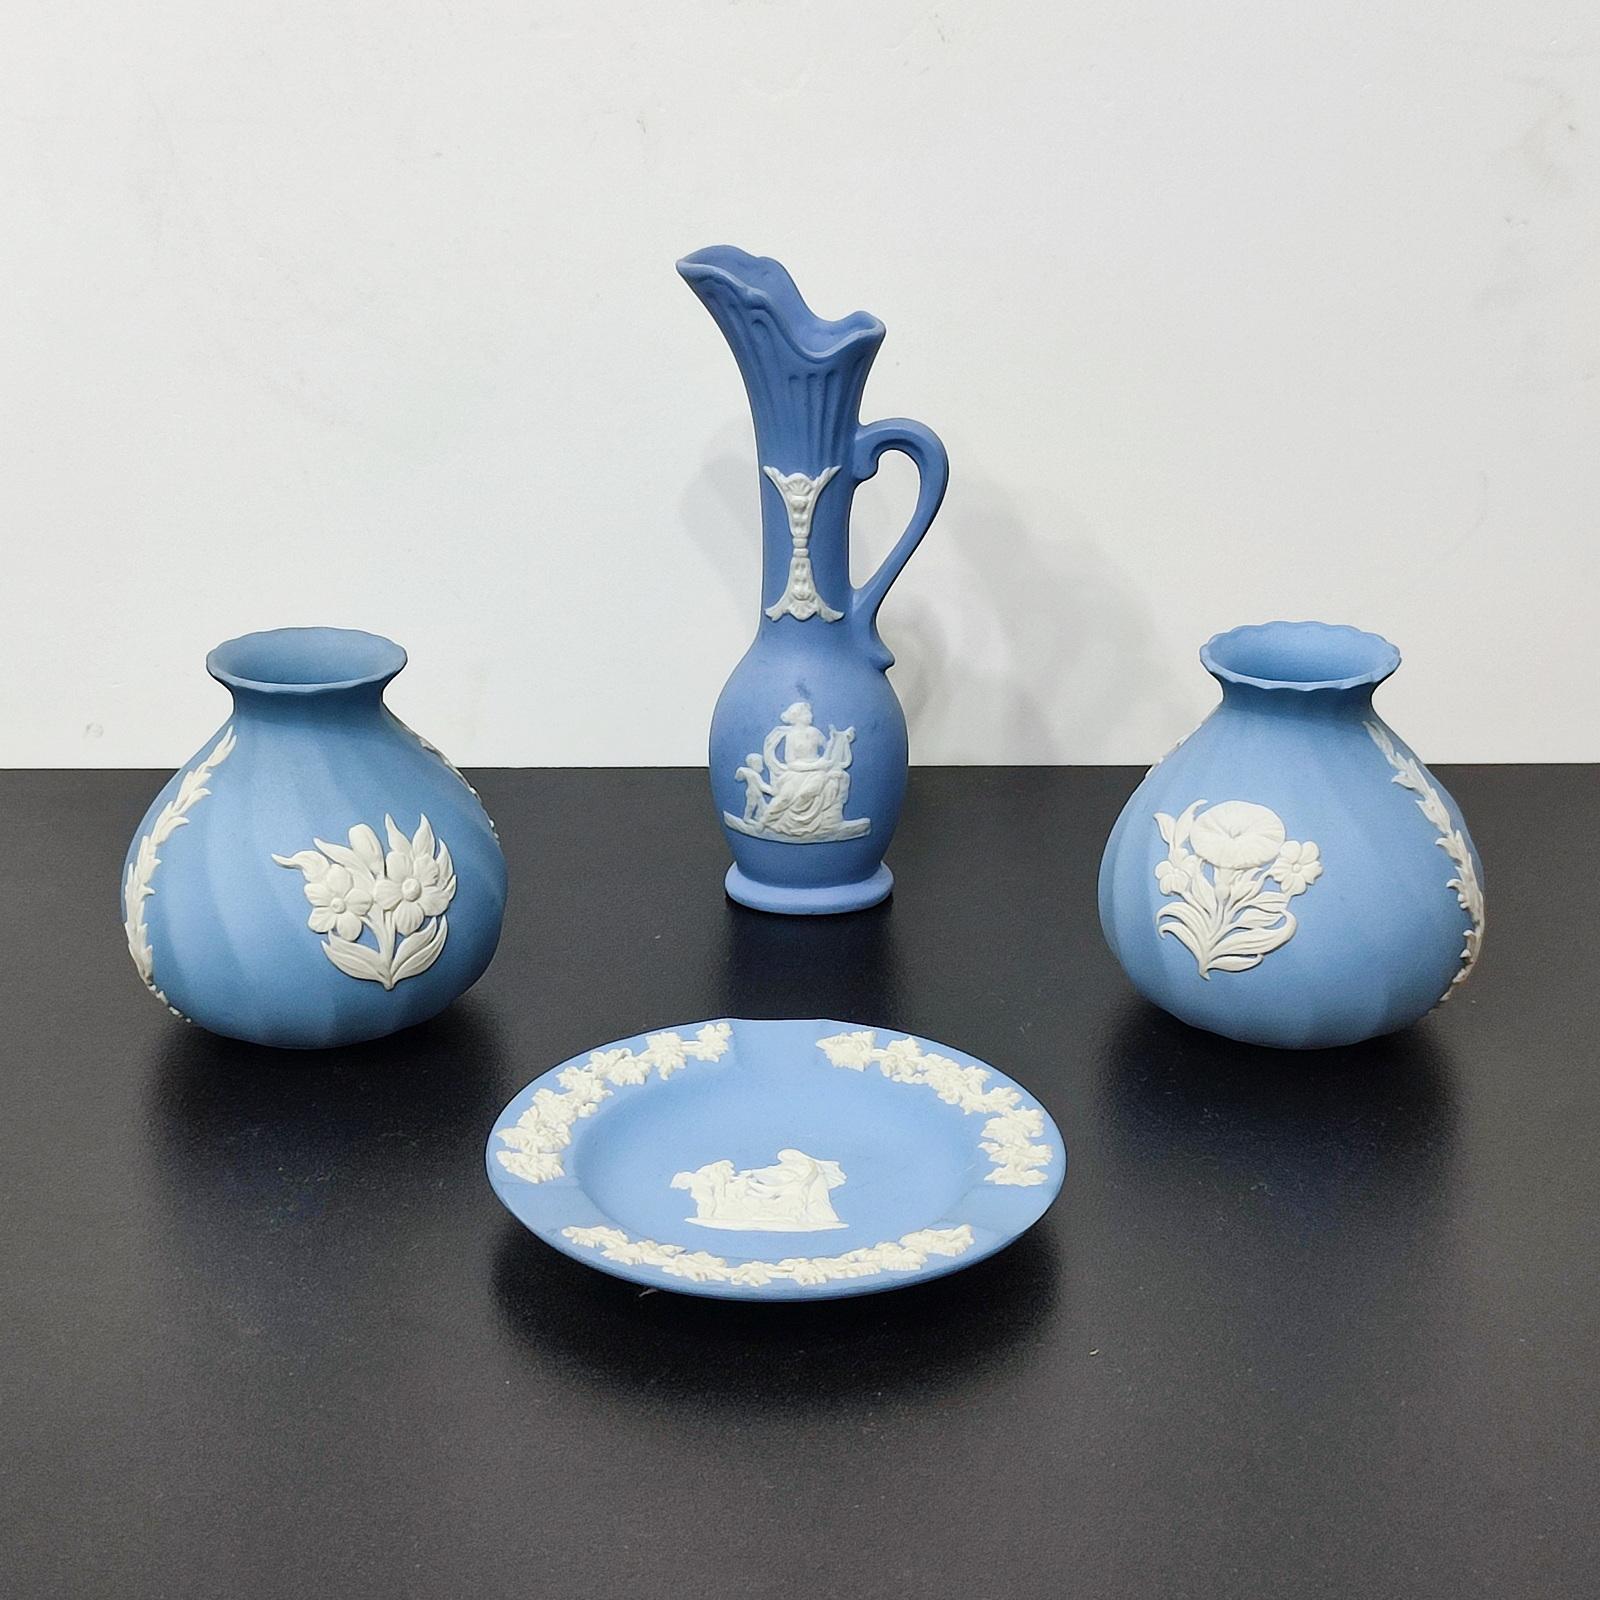 A lovely collection of Wedgwood Jasperware Pale Blue four pieces, comprising a jug, a pair of vases, and an ashtray. Made by Wedgwood in England in 1980s, marked/stamped on base.
Dimensions:
Jug 6x4x15.5
2 x Vases H8.5 cm ⌀ 8 cm
Ashtray H 1.5 cm, ⌀